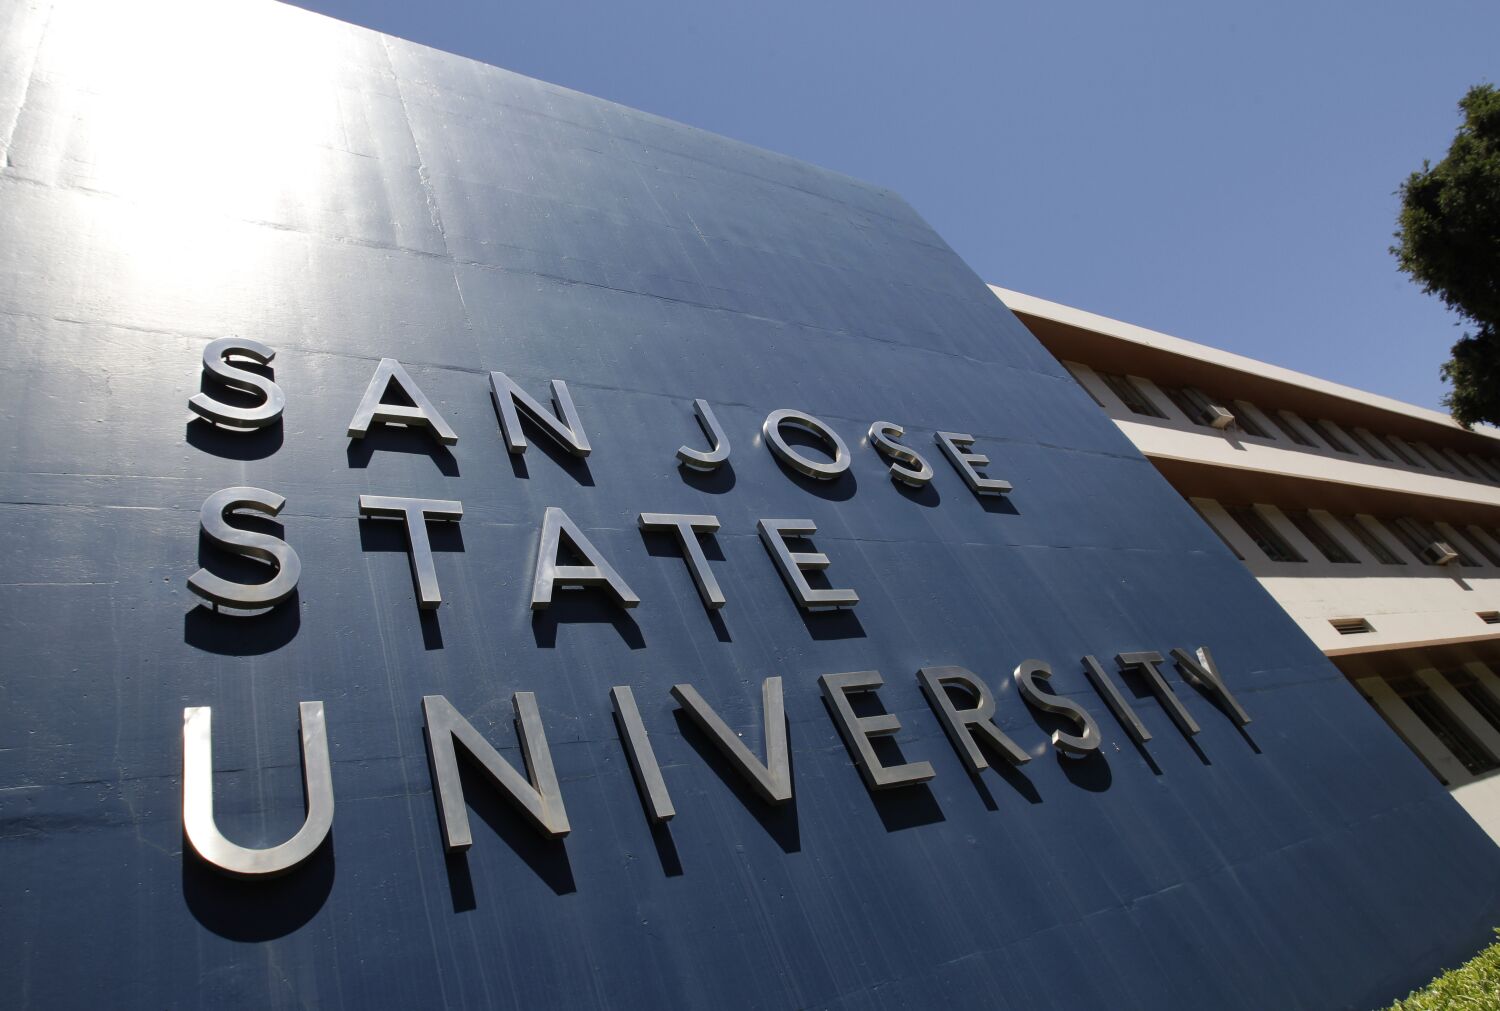 Possible armed suspect reported inside bathroom at San Jose State library